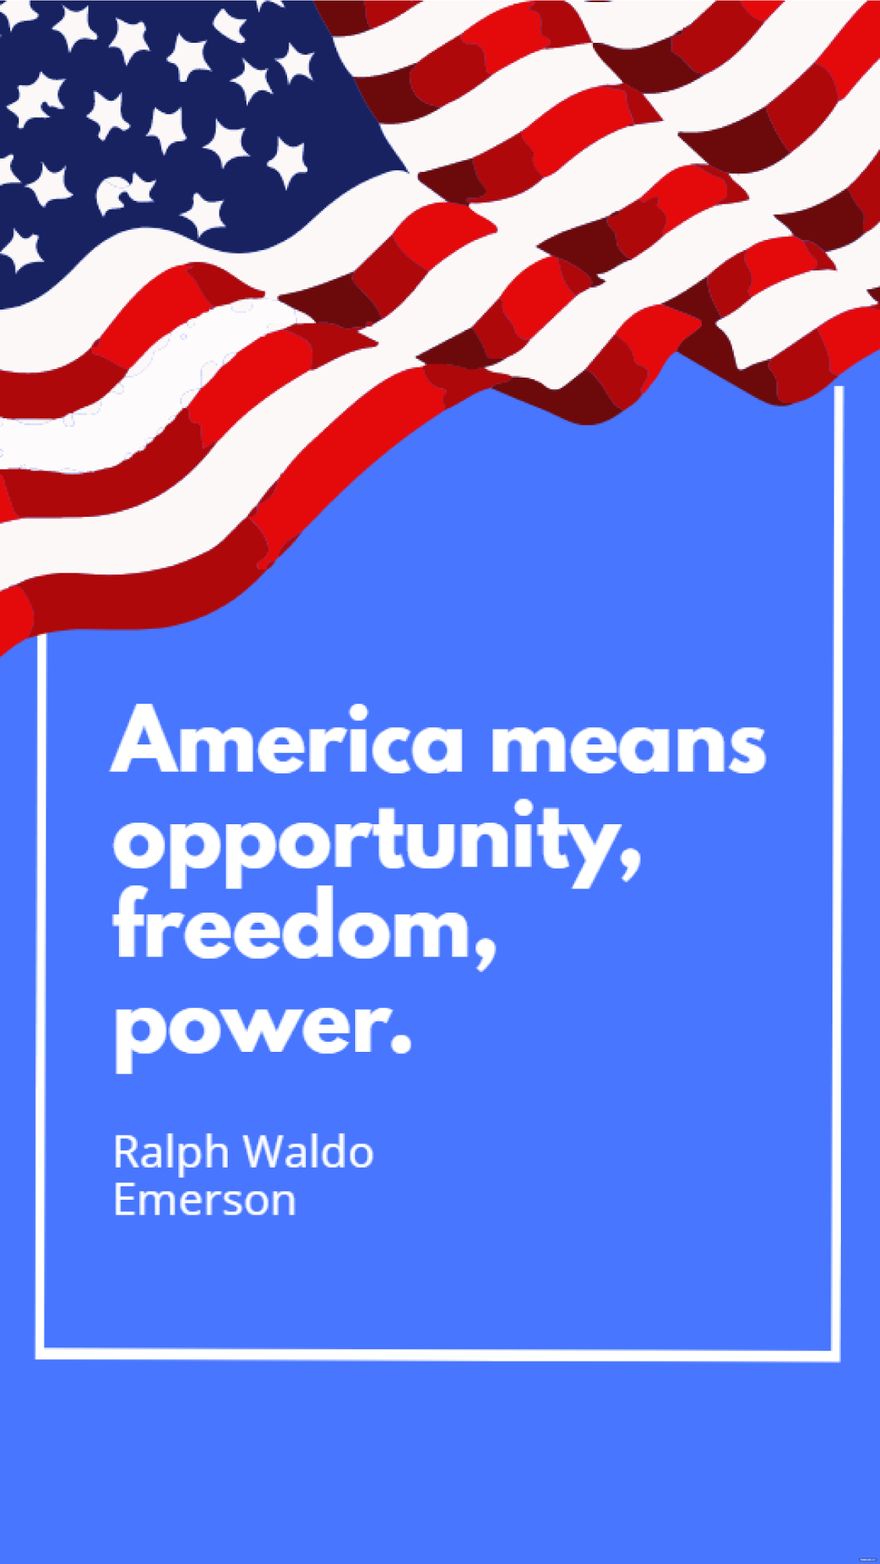 Ralph Waldo Emerson - America means opportunity, freedom, power.